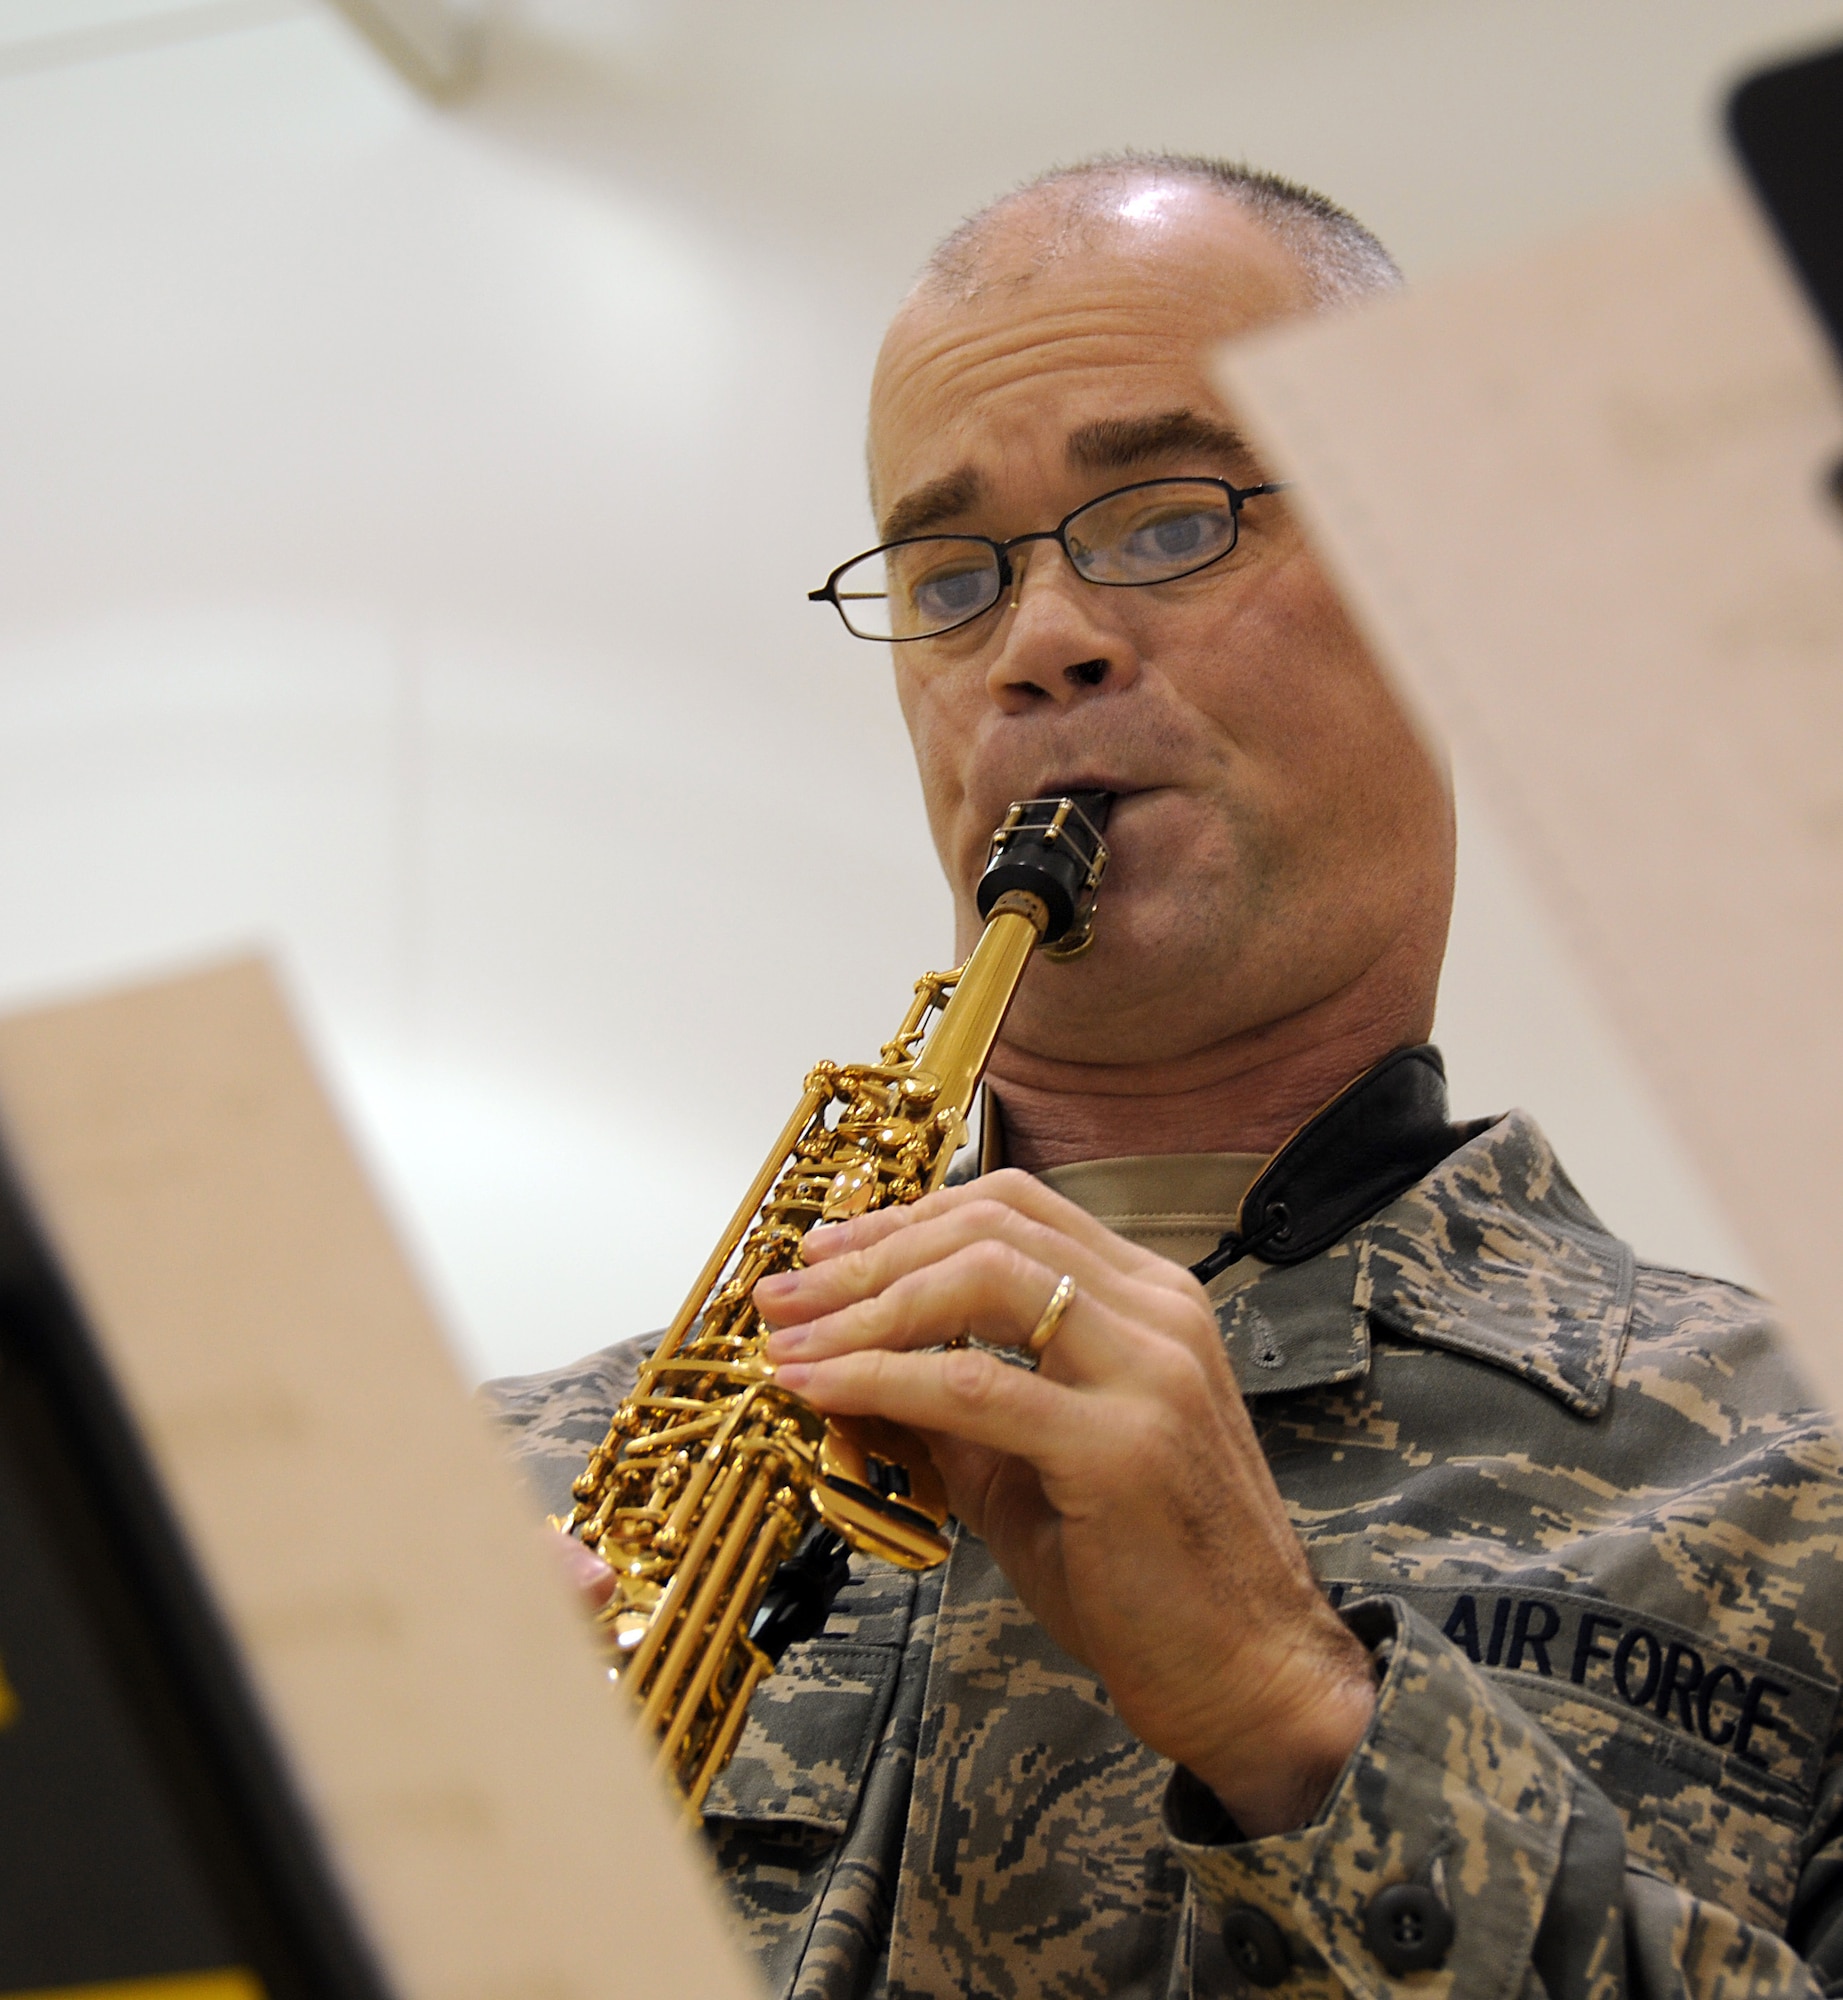 Tech. Sgt. Mike Van Arsdale, a member of the U.S. Air Force Band of the Pacific, plays a Christmas tune at St. George School on Nov. 7, 2009. U.S. Air Force photo by 1st Lt. John Callahan. 